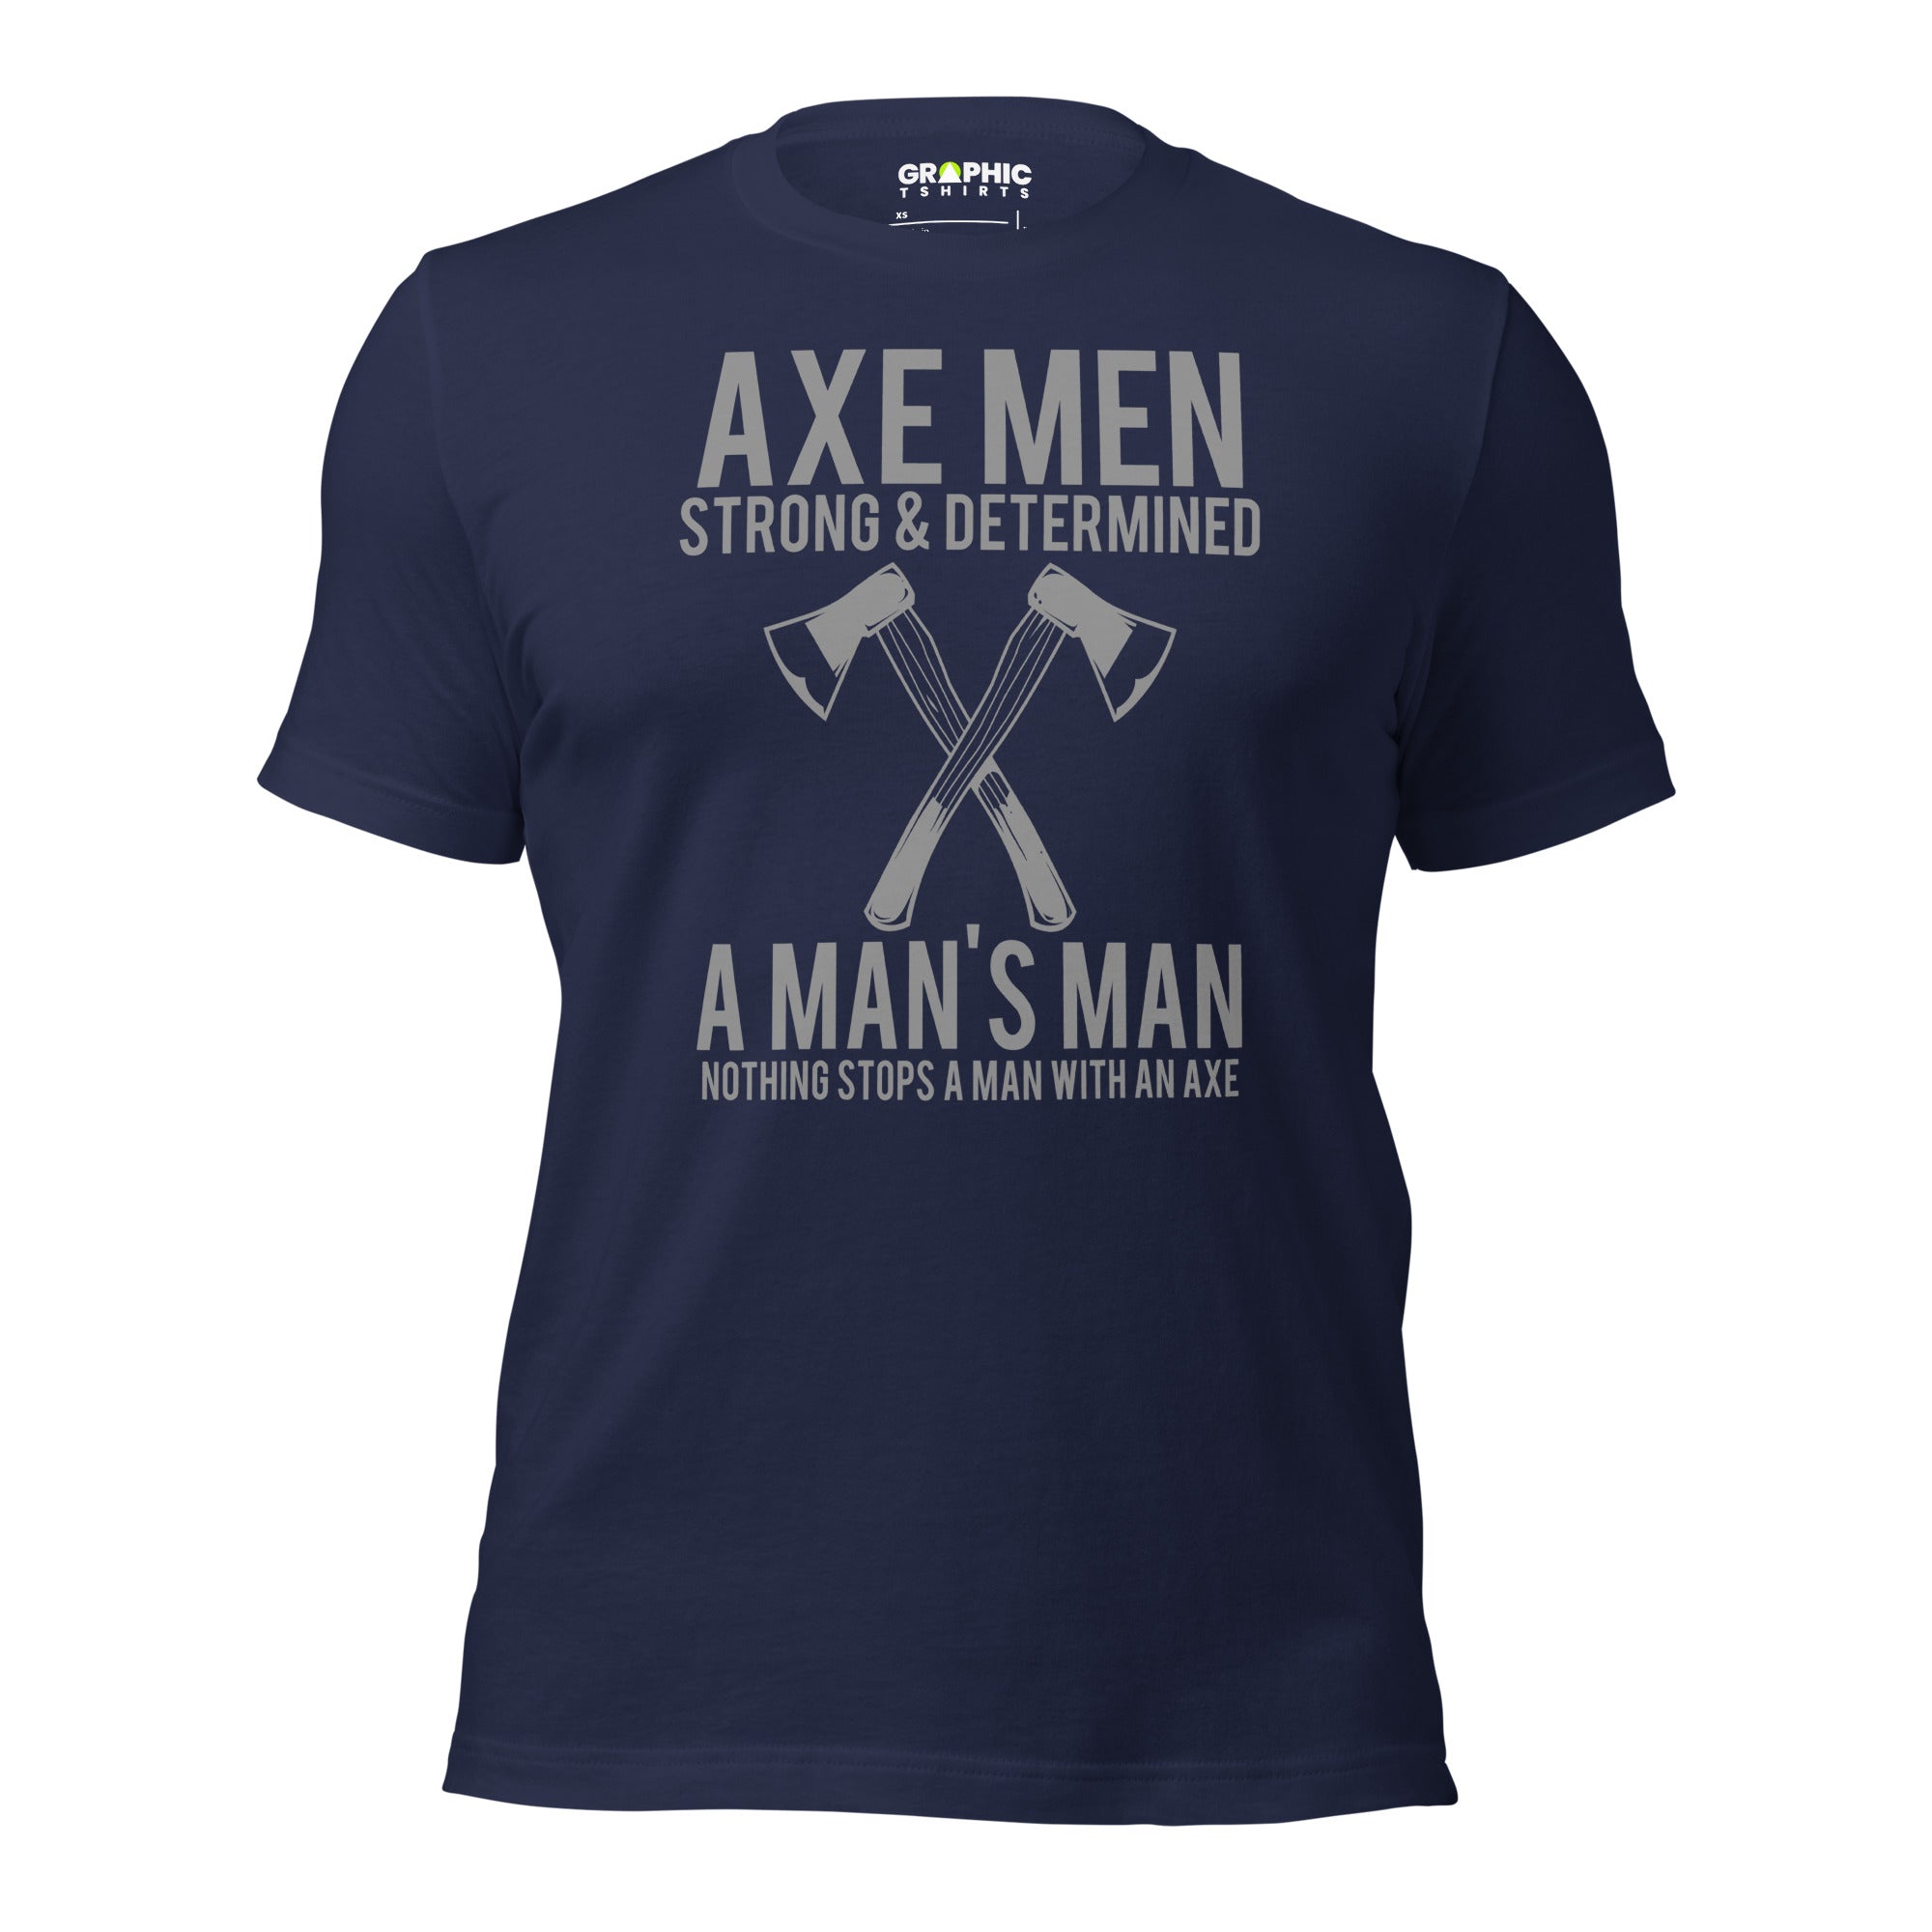 Unisex Staple T-Shirt - Axe Men Strong And Determined A Man's Man Nothing Stops A Man With An Axe - GRAPHIC T-SHIRTS